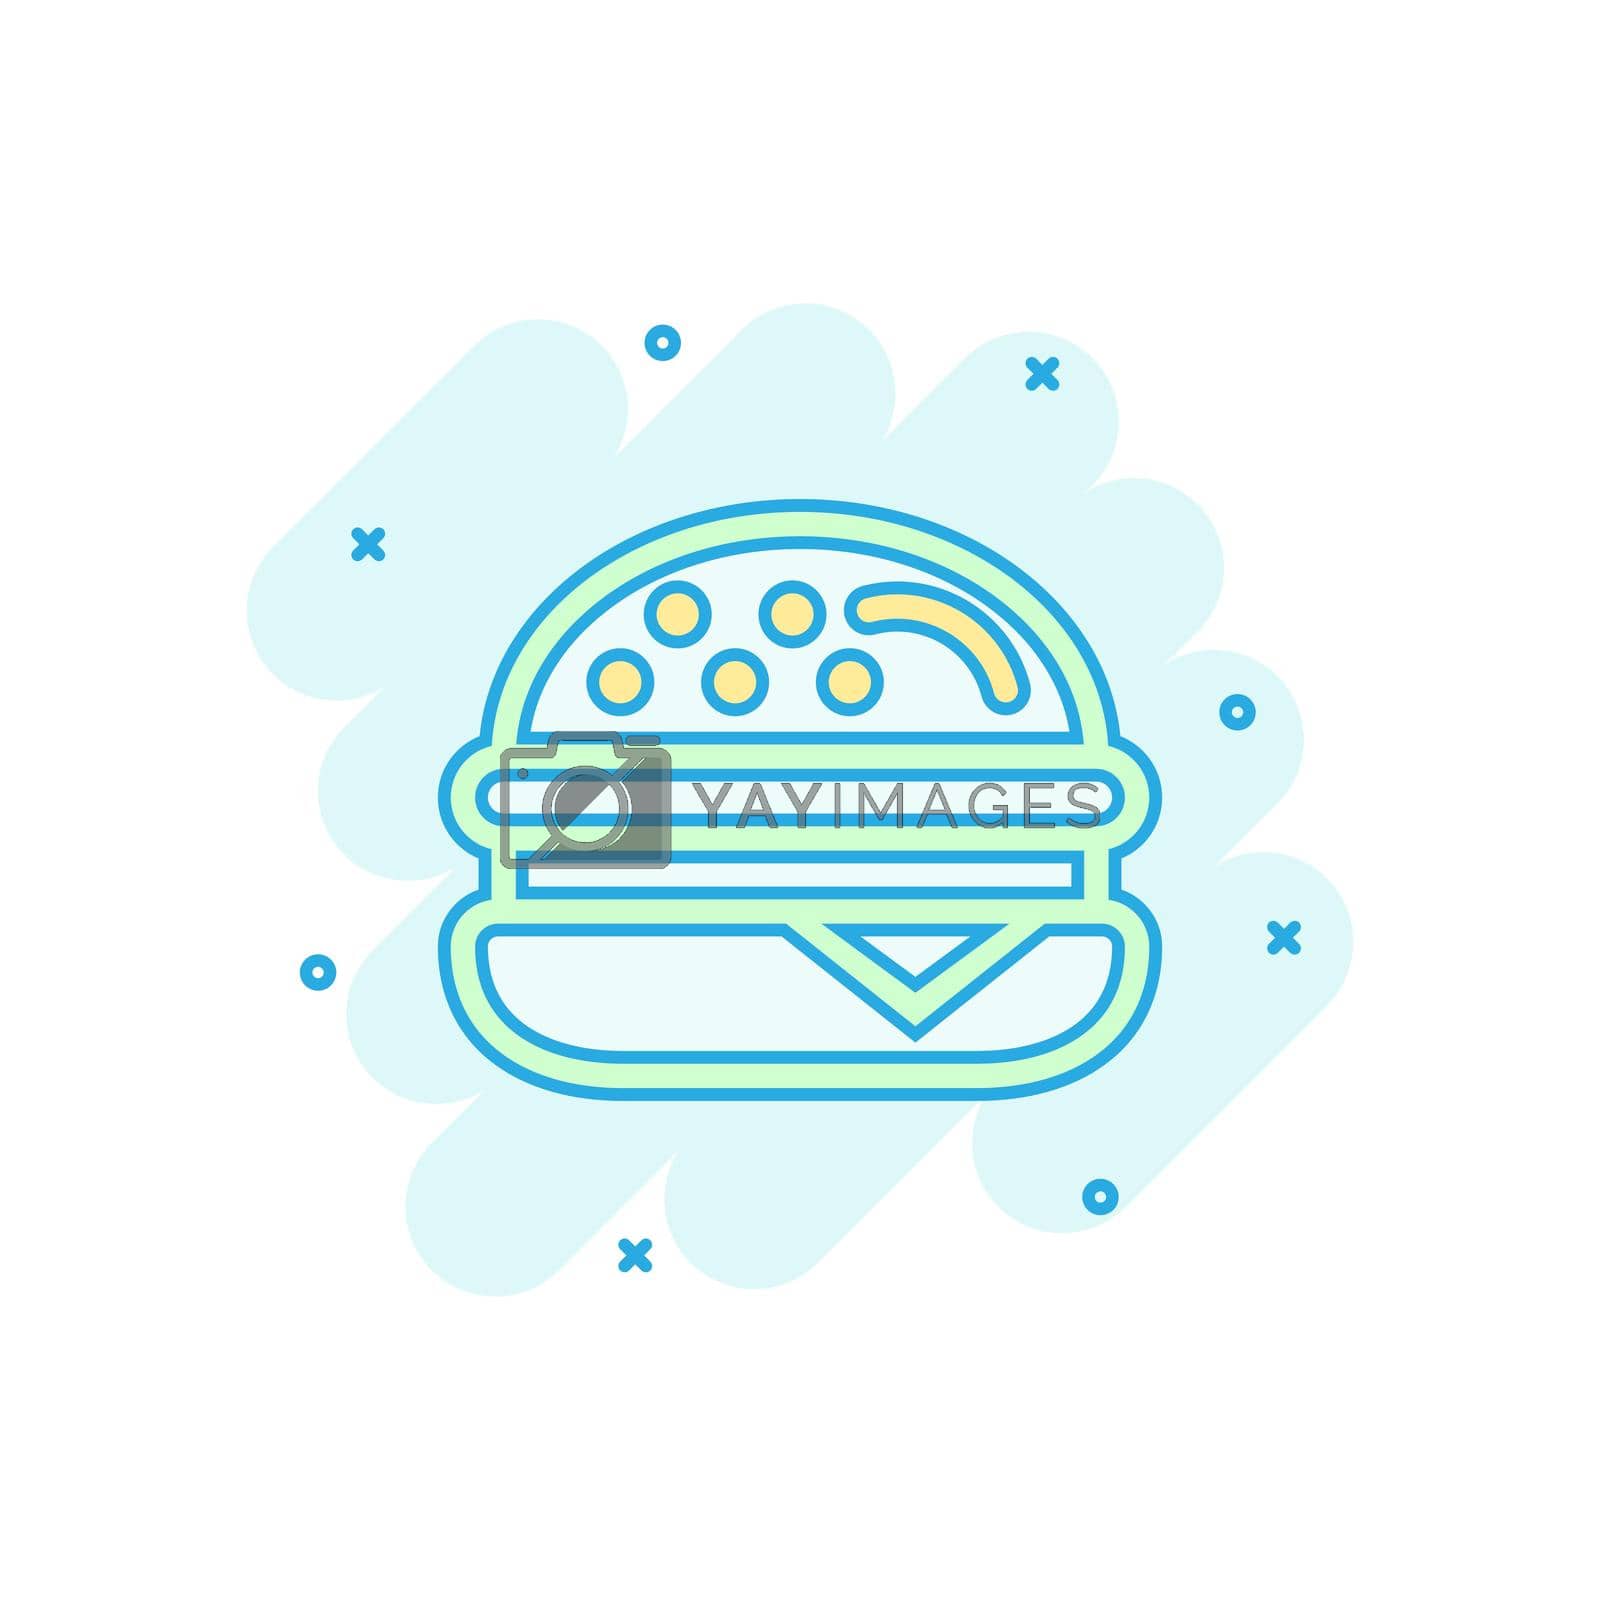 Royalty free image of Burger sign icon in comic style. Hamburger vector cartoon illustration on white isolated background. Cheeseburger business concept splash effect. by LysenkoA